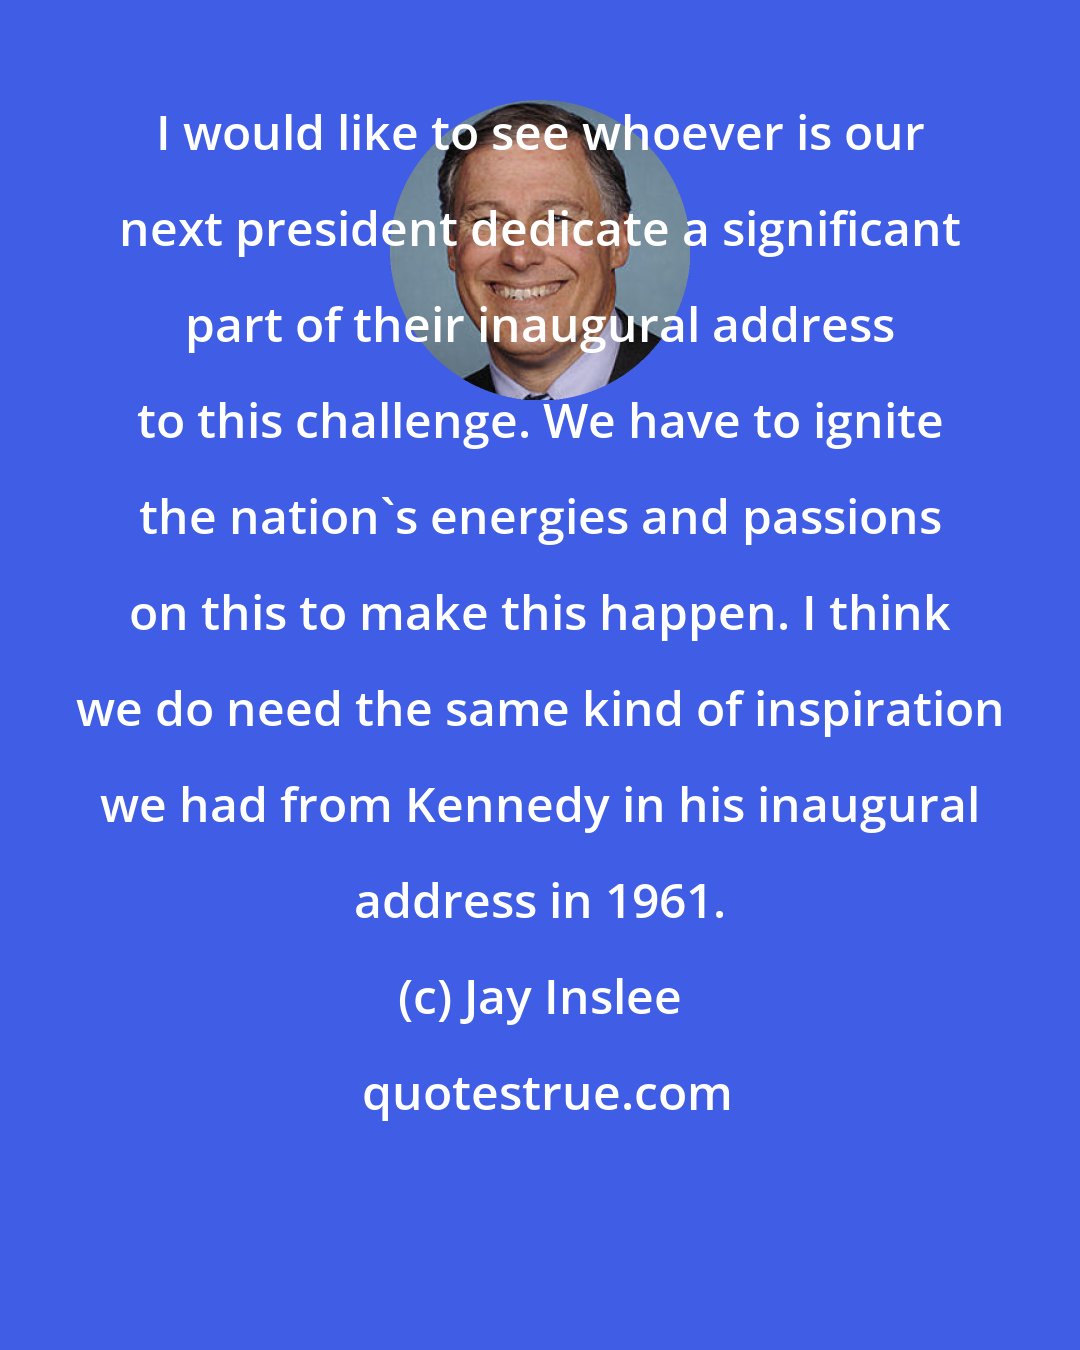 Jay Inslee: I would like to see whoever is our next president dedicate a significant part of their inaugural address to this challenge. We have to ignite the nation's energies and passions on this to make this happen. I think we do need the same kind of inspiration we had from Kennedy in his inaugural address in 1961.